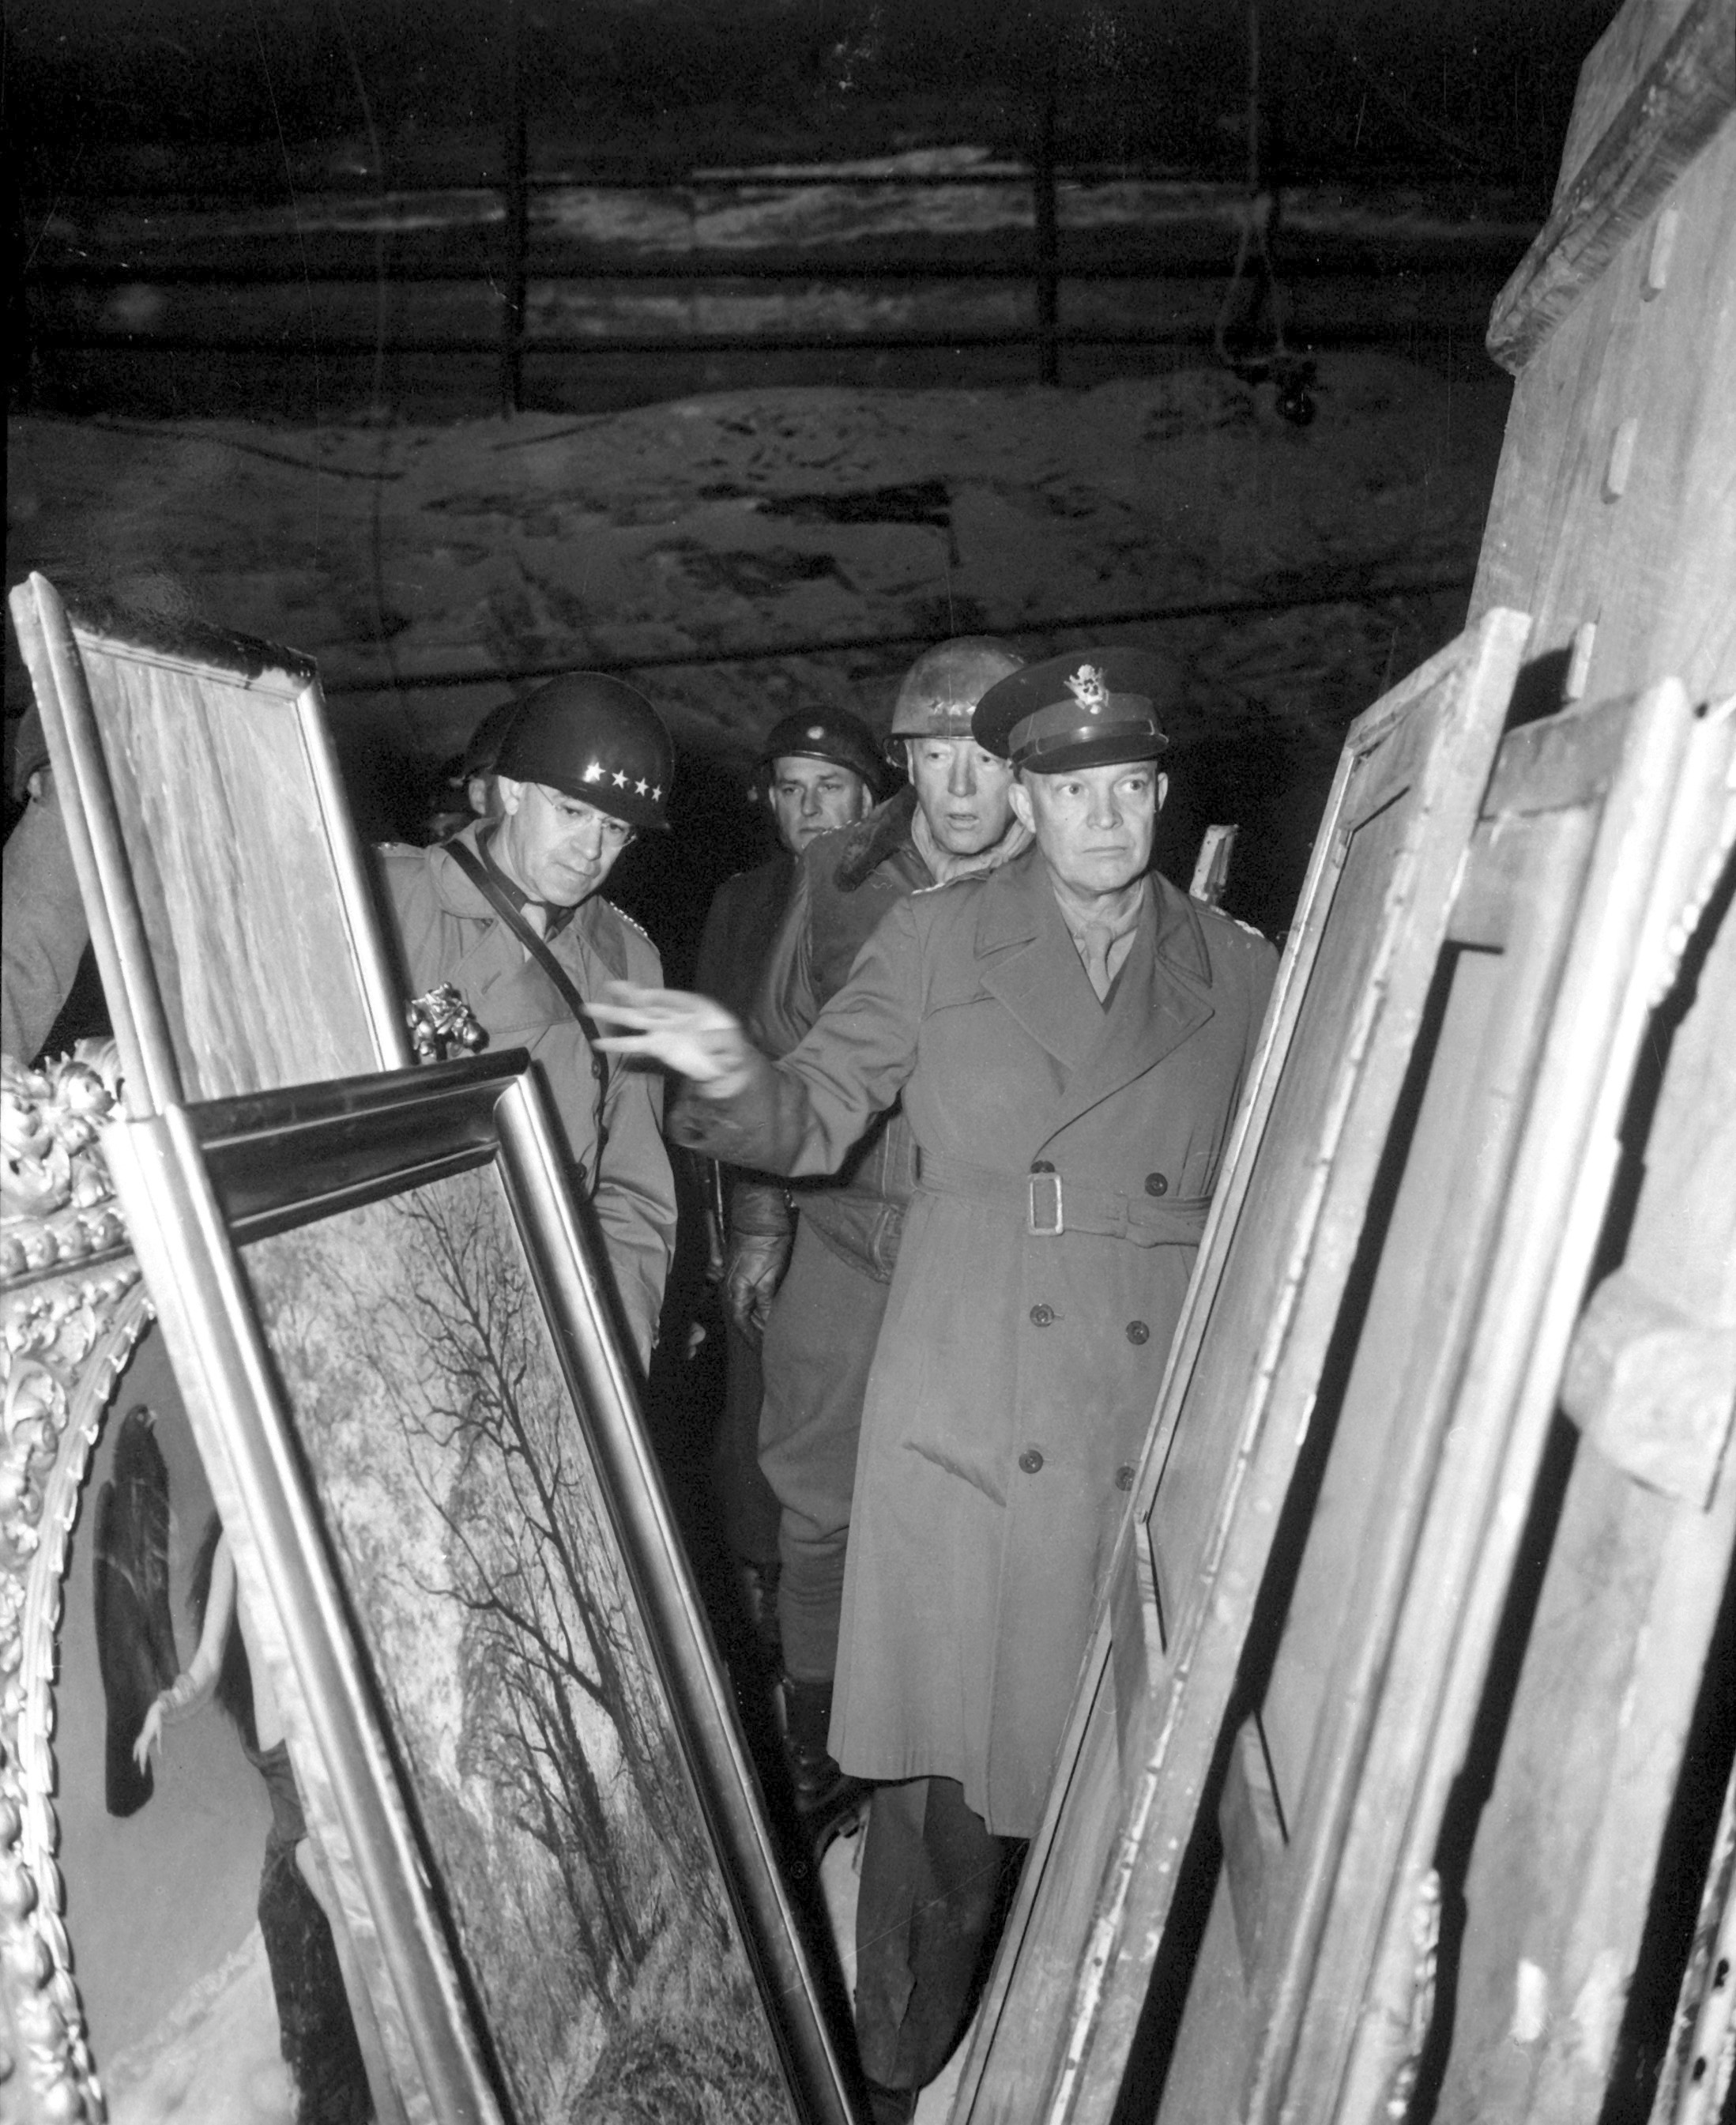 Eisenhower, Bradley and Patton inspect art treasures stolen by Germans and hidden in salt mine in Germany. April 12, 1945